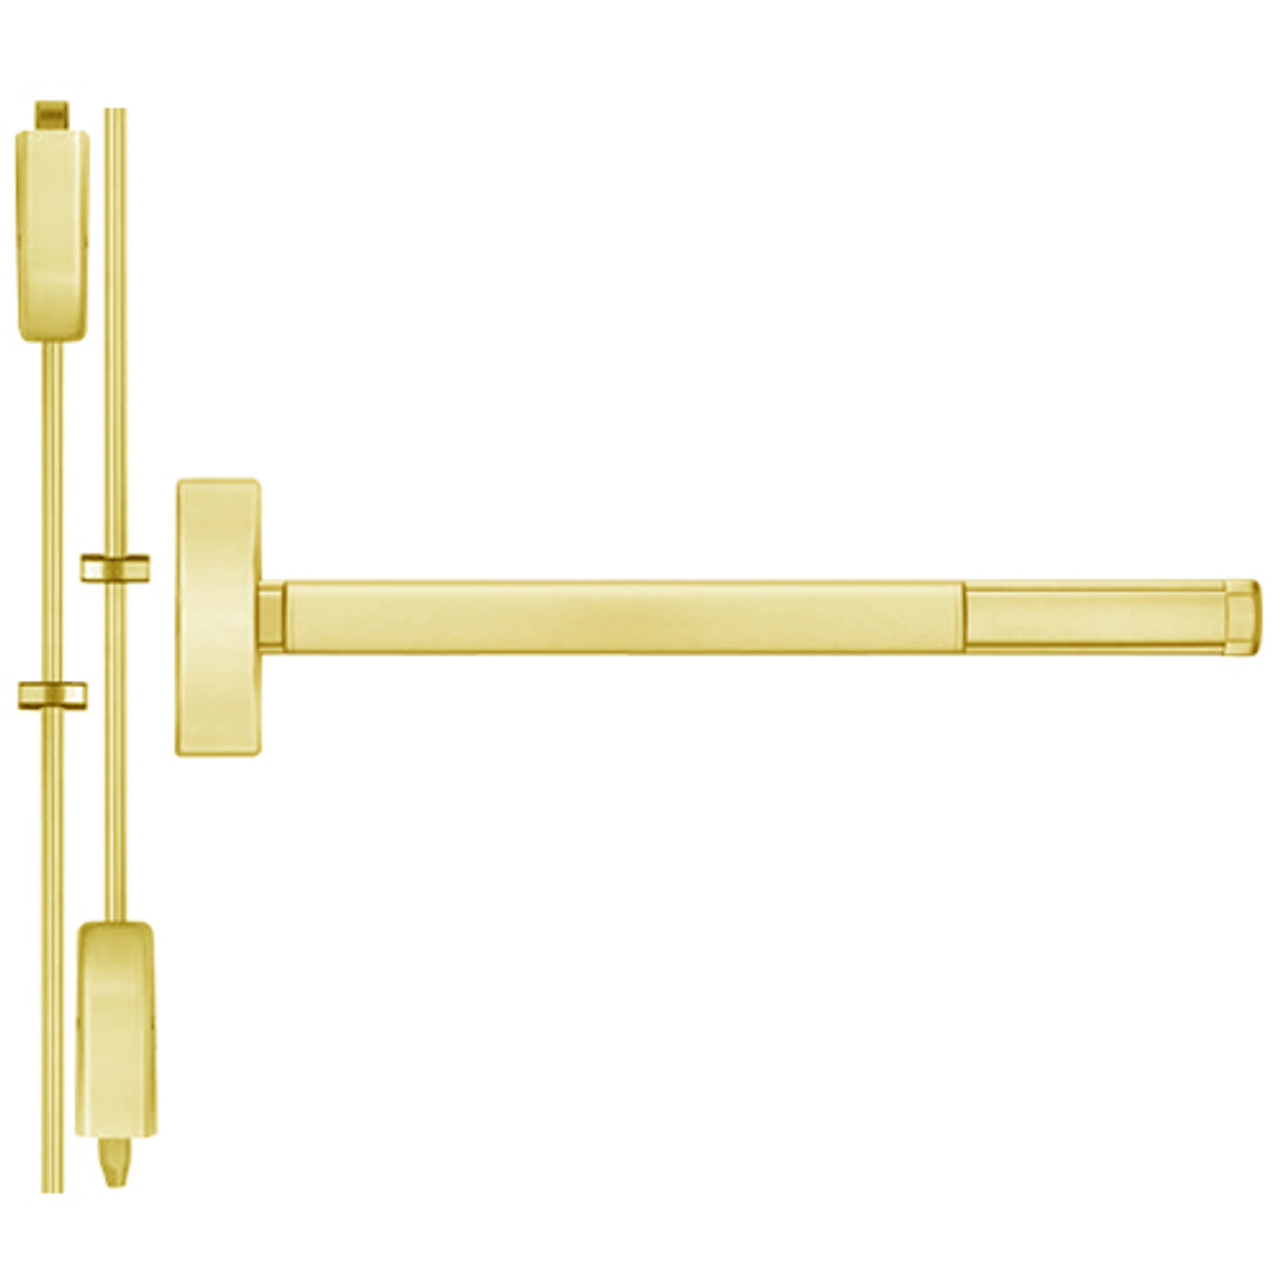 2203-605-36 PHI 2200 Series Non Fire Rated Apex Surface Vertical Rod Exit Device Prepped for Key Retracts Latchbolt in Bright Brass Finish